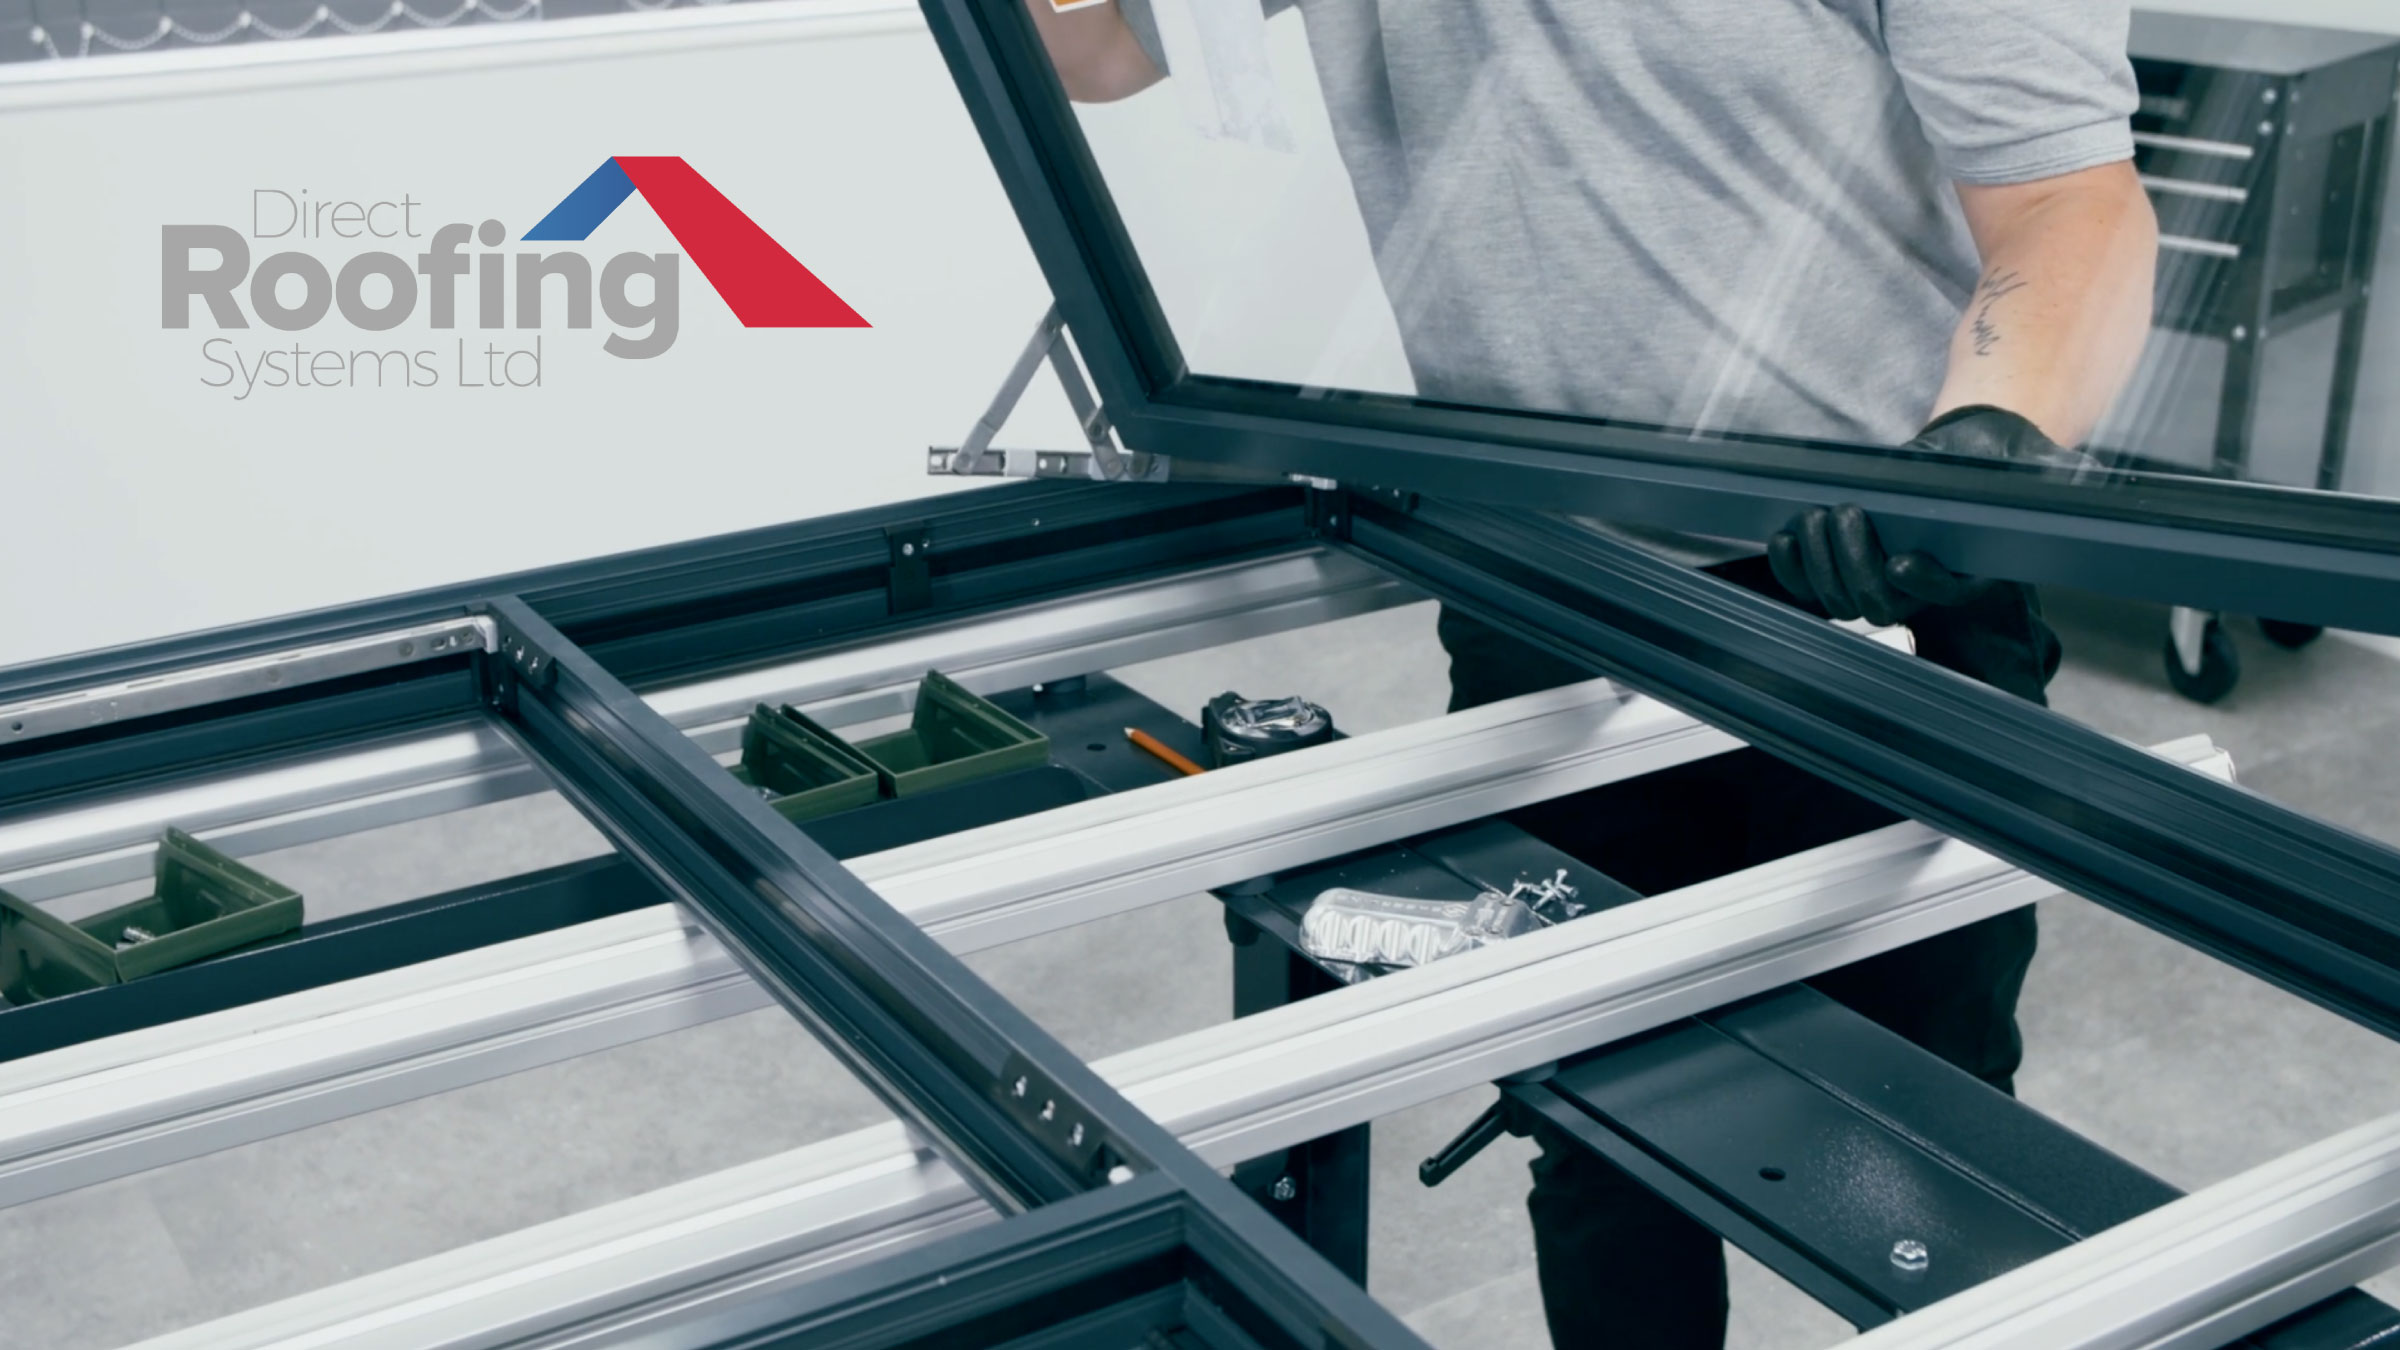 Direct Roofing Systems partners with Sheerline the ‘game changer’